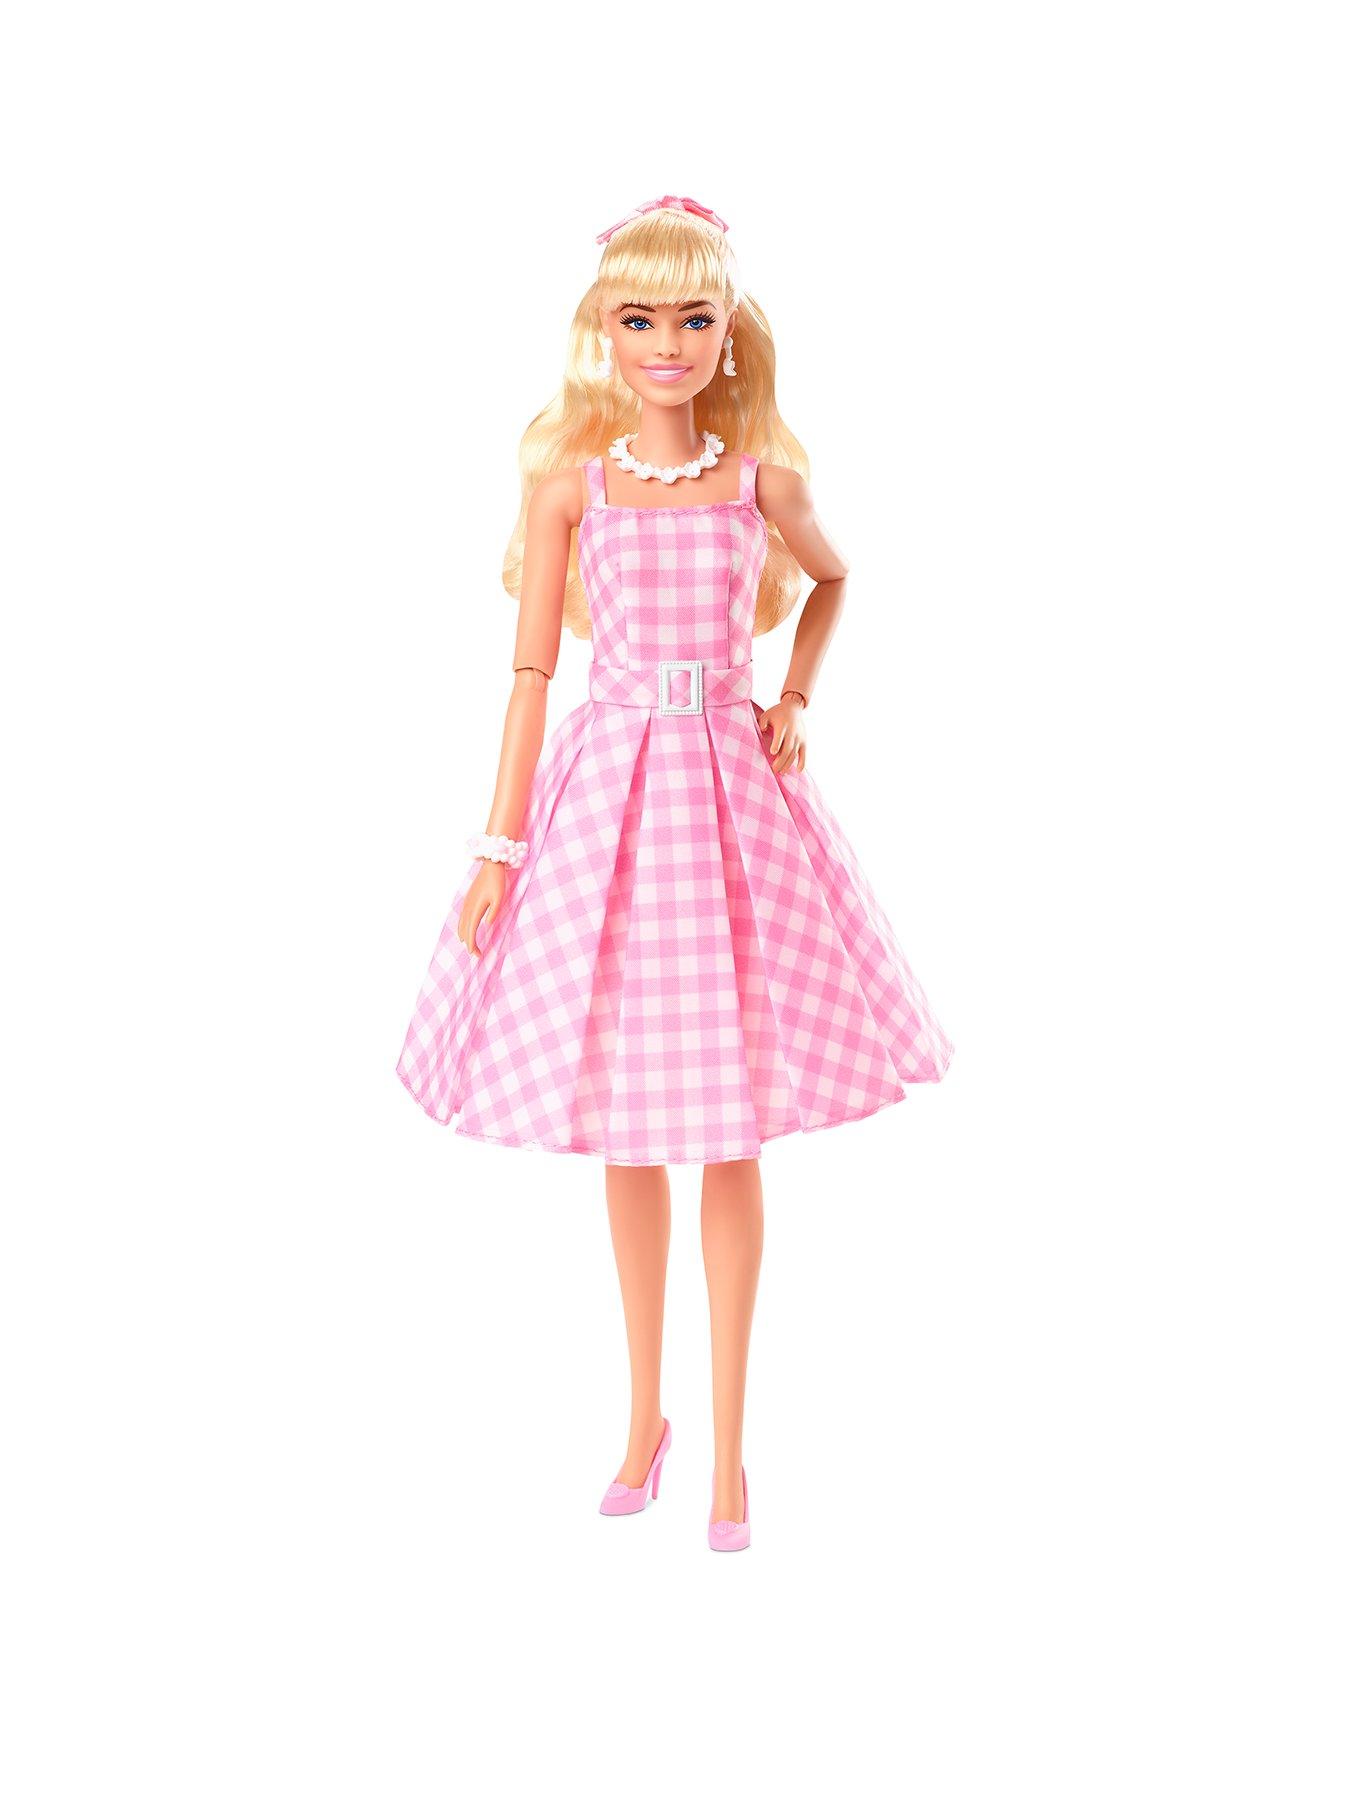 370 Black barbies in pink and pastels ideas